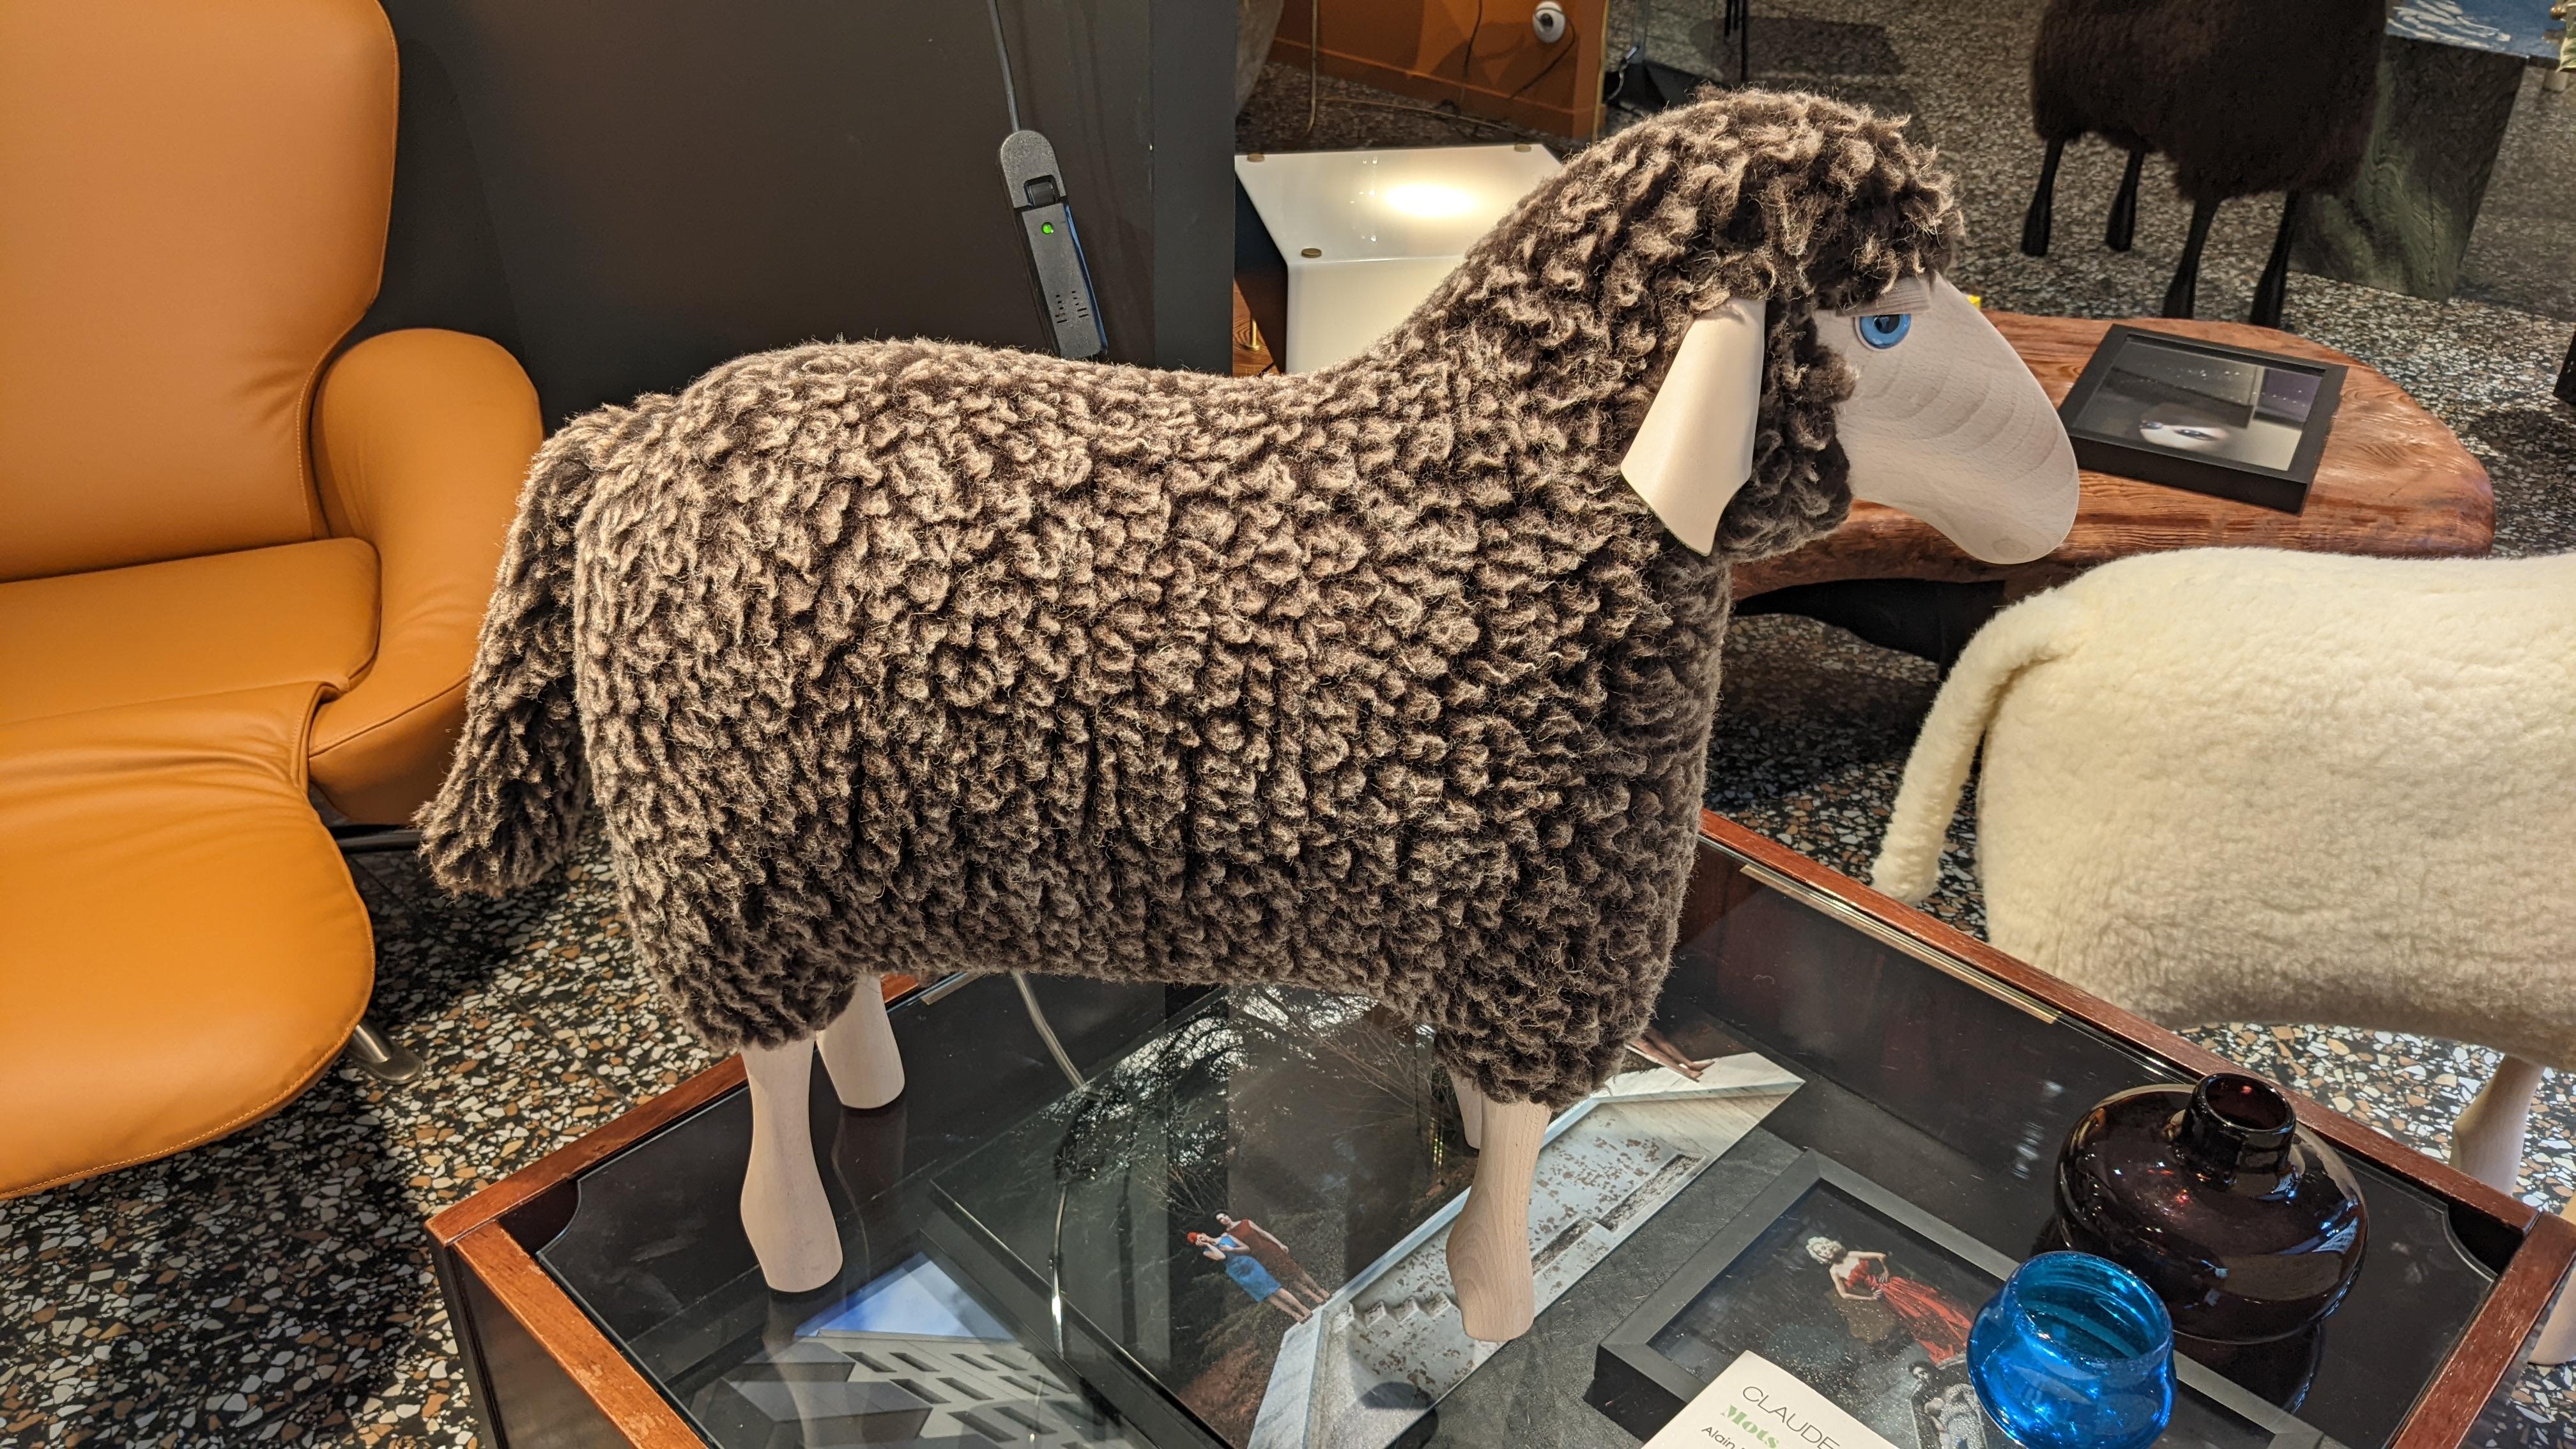 Sheep' is a sculpture in the shape of a sheep created by Hans-Peter KRAFFT in 1982 and handmade in Germany. 
This sheep is designed as a piece of furniture and is strong enough to be used as a stool by adults and children.

Materials:
Wool,